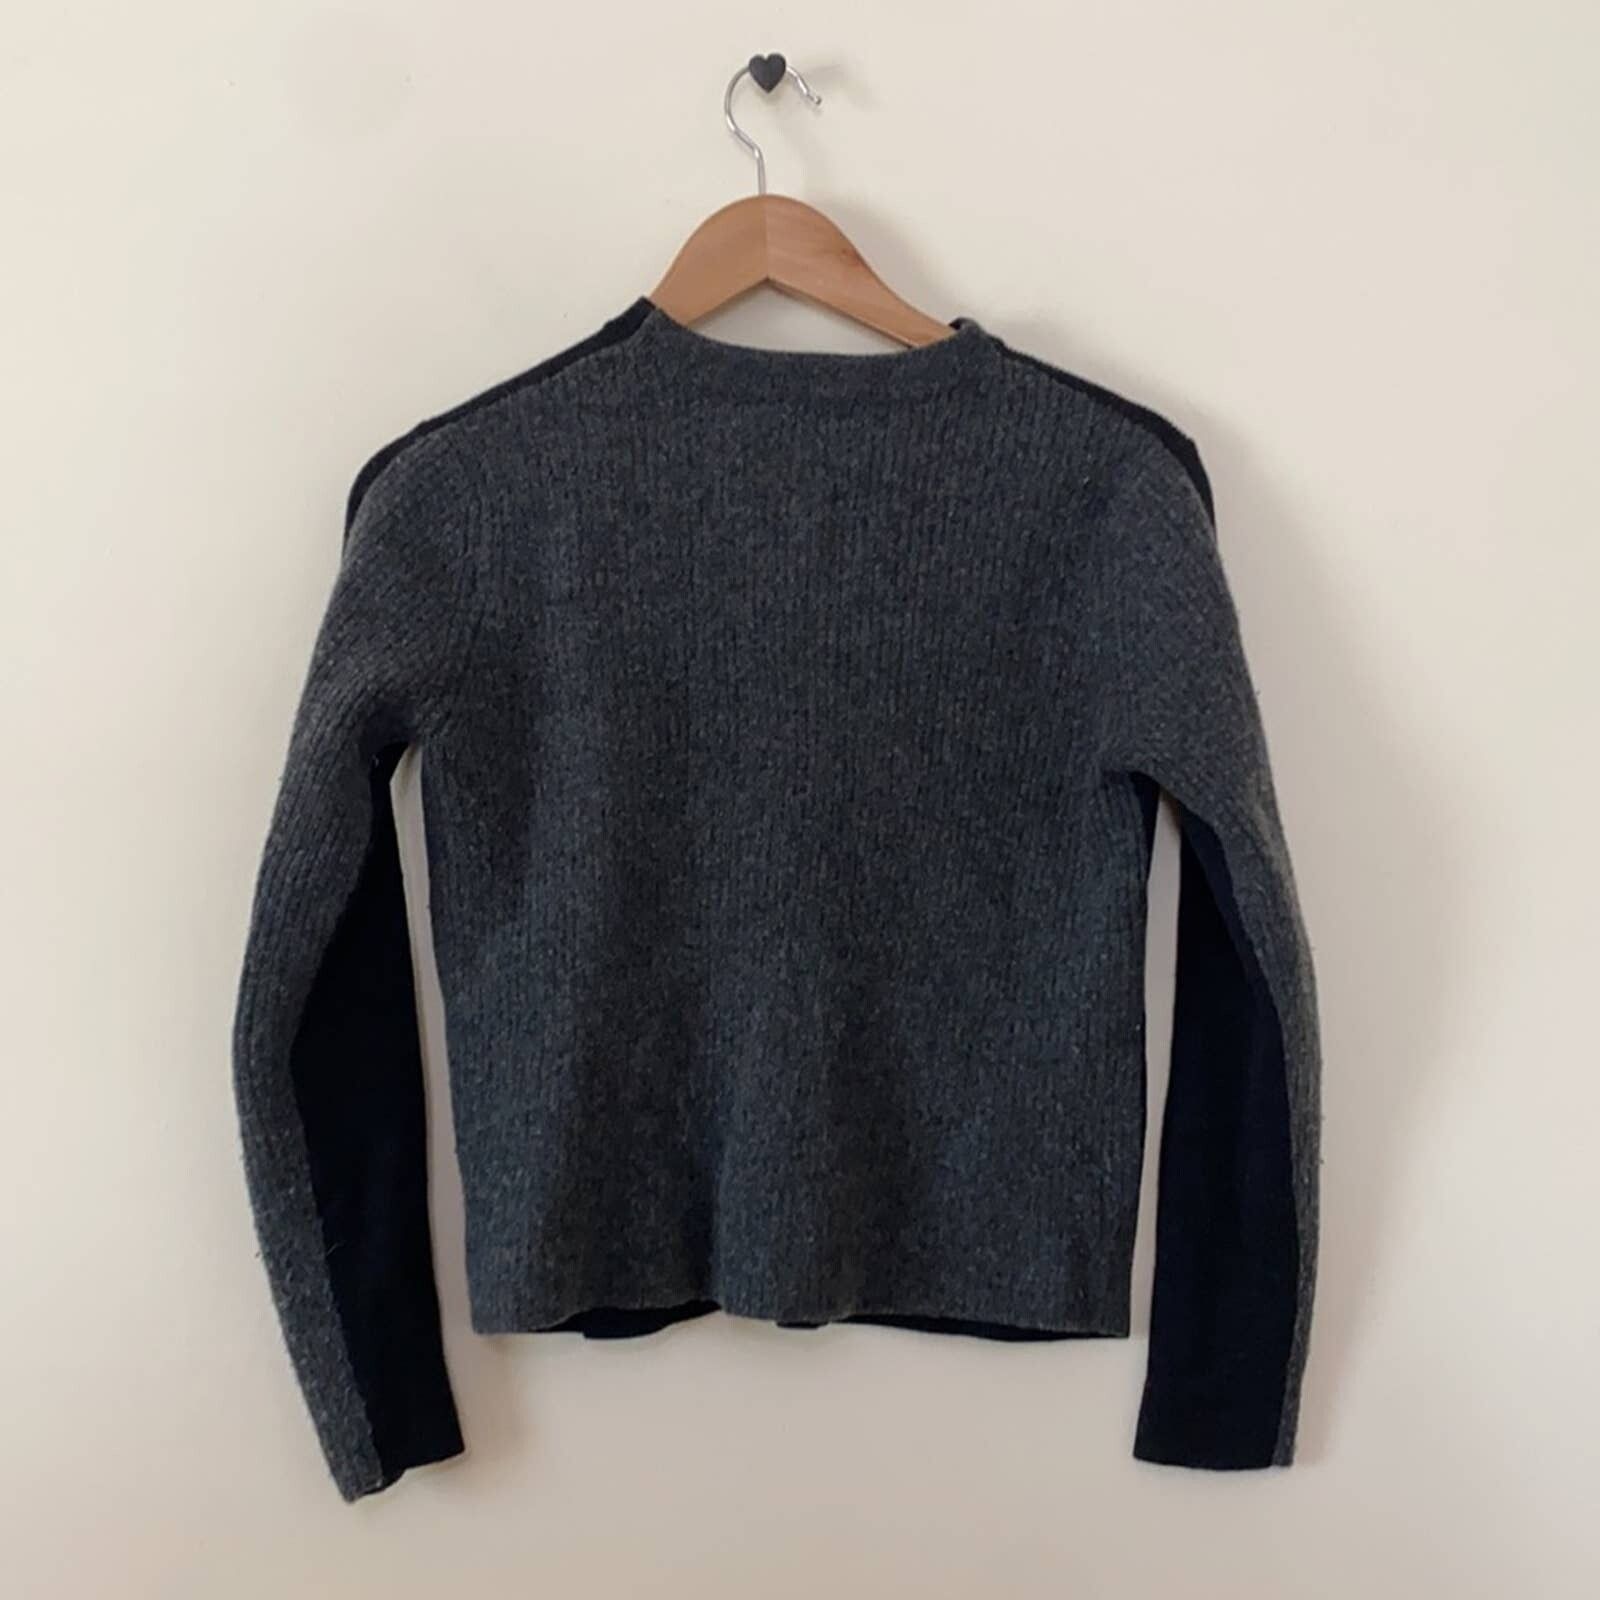 Cos COS Two Tone Wool Blend Sweater Size S / US 4 / IT 40 - 2 Preview